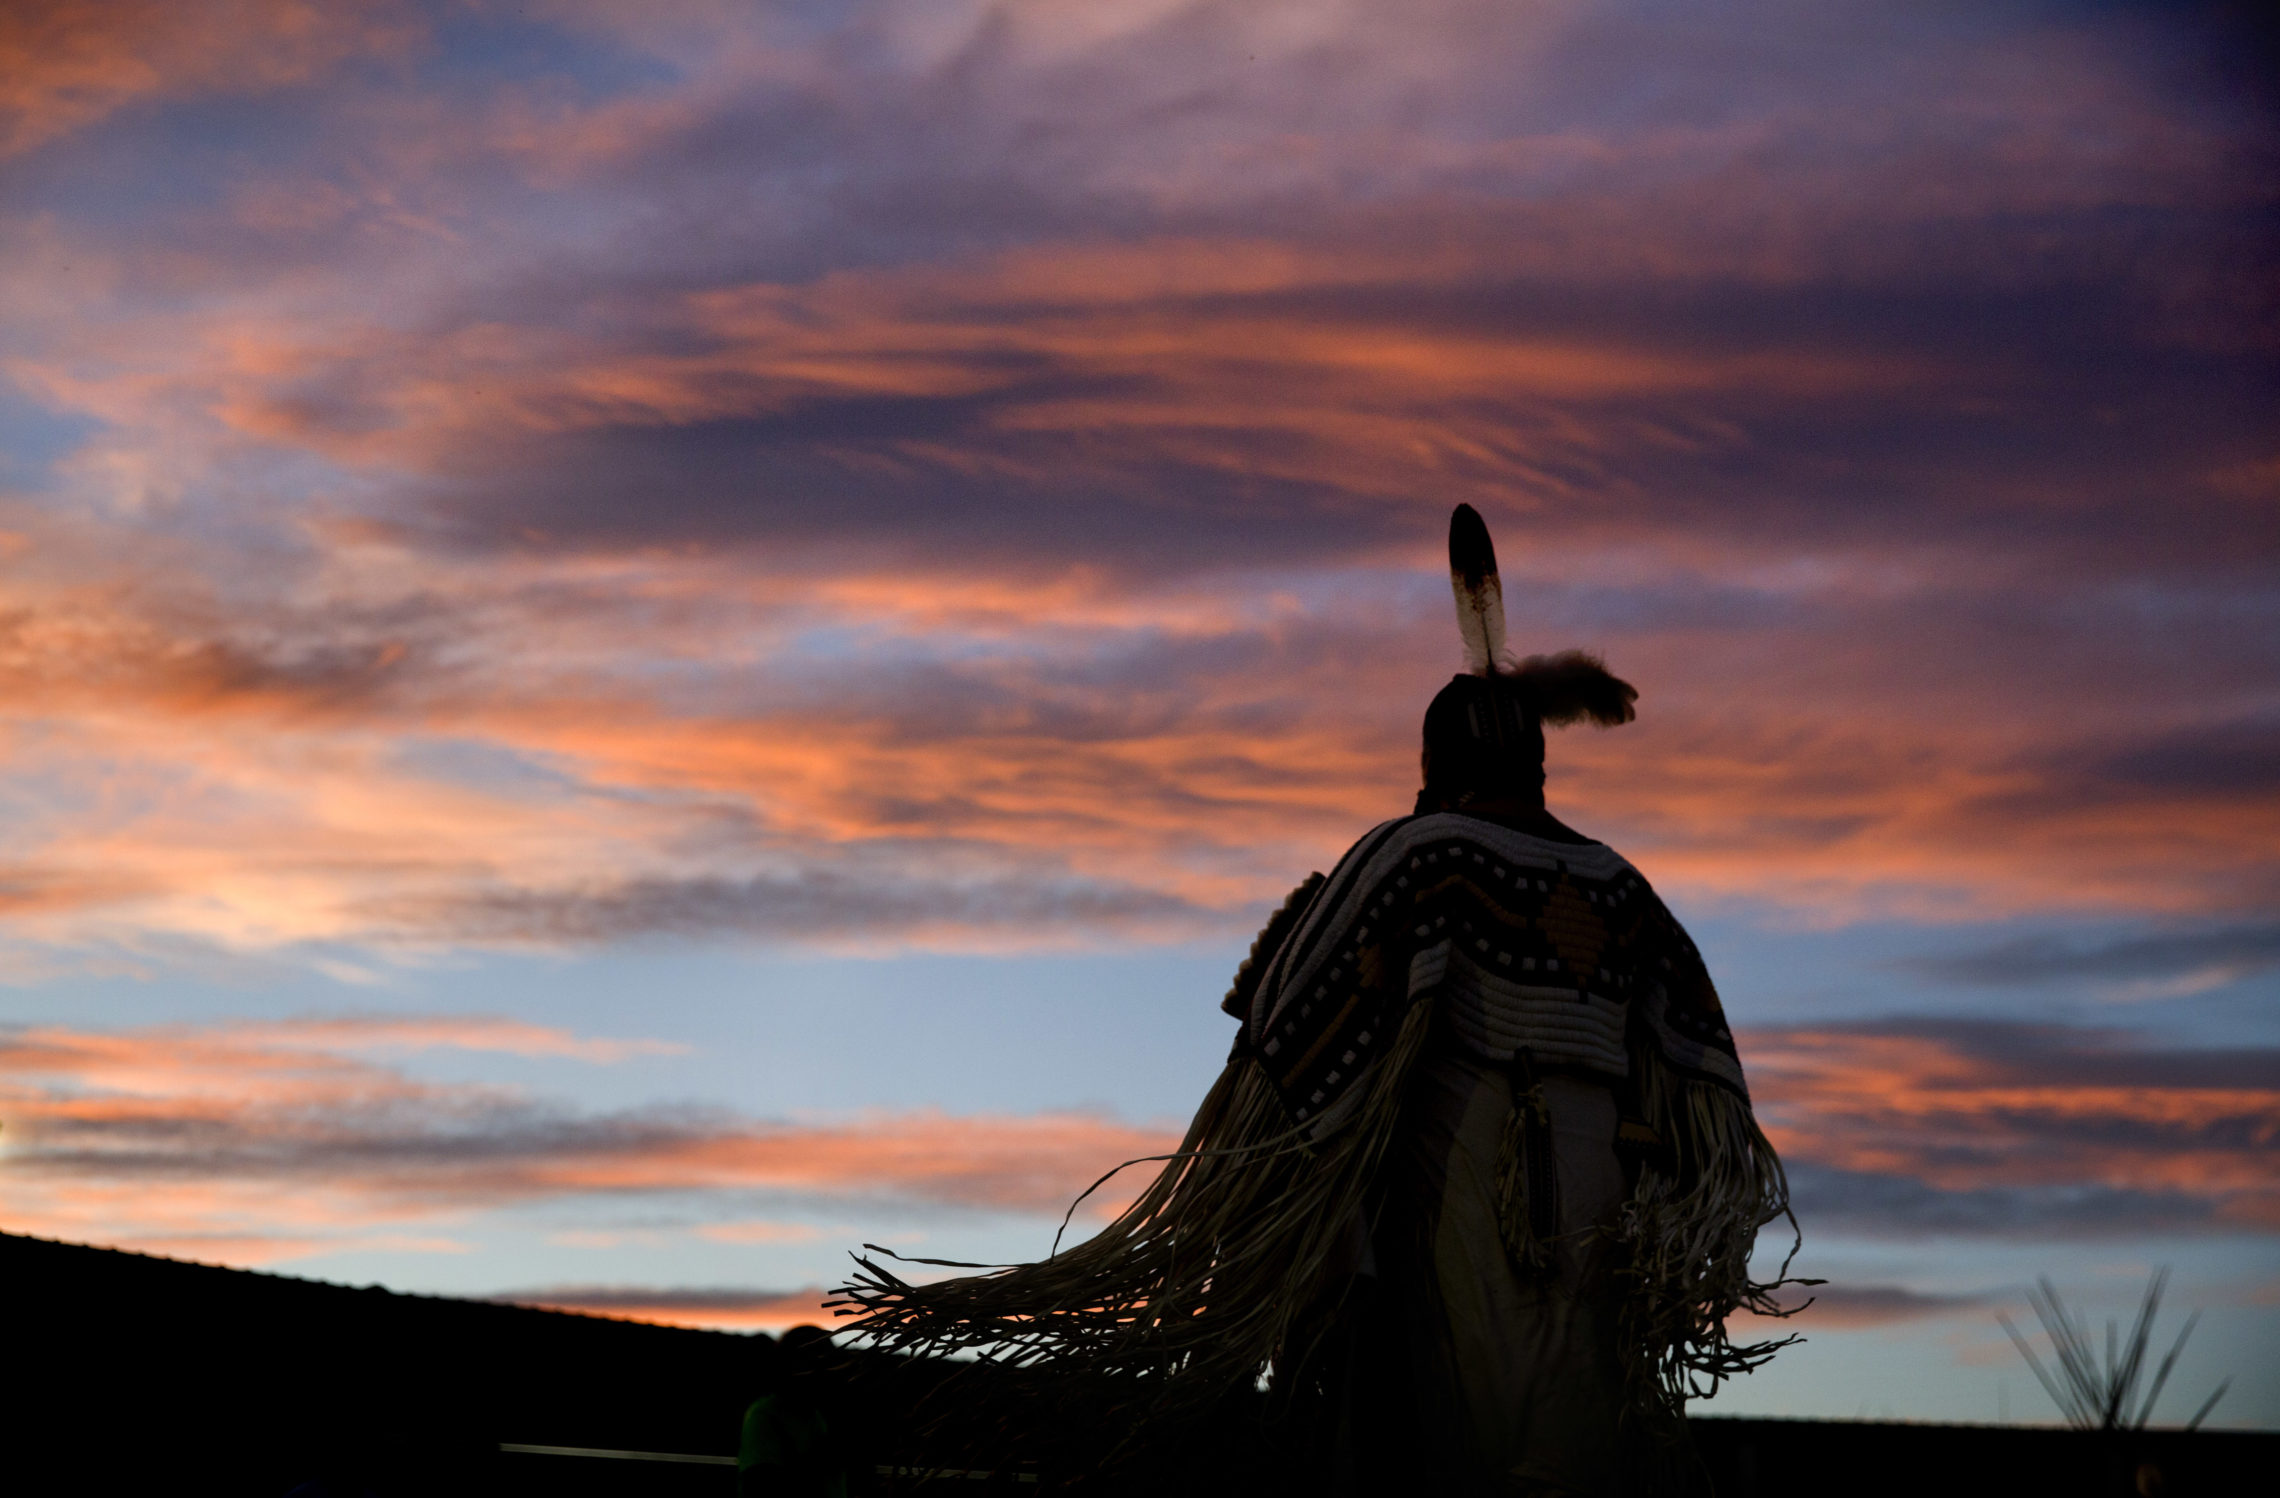 A woman performs a traditional Native American dance during the North American Indian Days celebration on the Blackfeet Indian Reservation in Browning, Mont., Friday, July 13, 2018. North Dakota Democratic Sen. Heidi Heitkamp says Native American women are often subject to high rates of violence. "It becomes a population that you can prey on because no one does anything about it, because there's no deterrence, because there's no enforcement and no prosecution," said Heitkamp, who has introduced a bill aimed at addressing this issue. CREDIT: DAVID GOLDMAN/AP